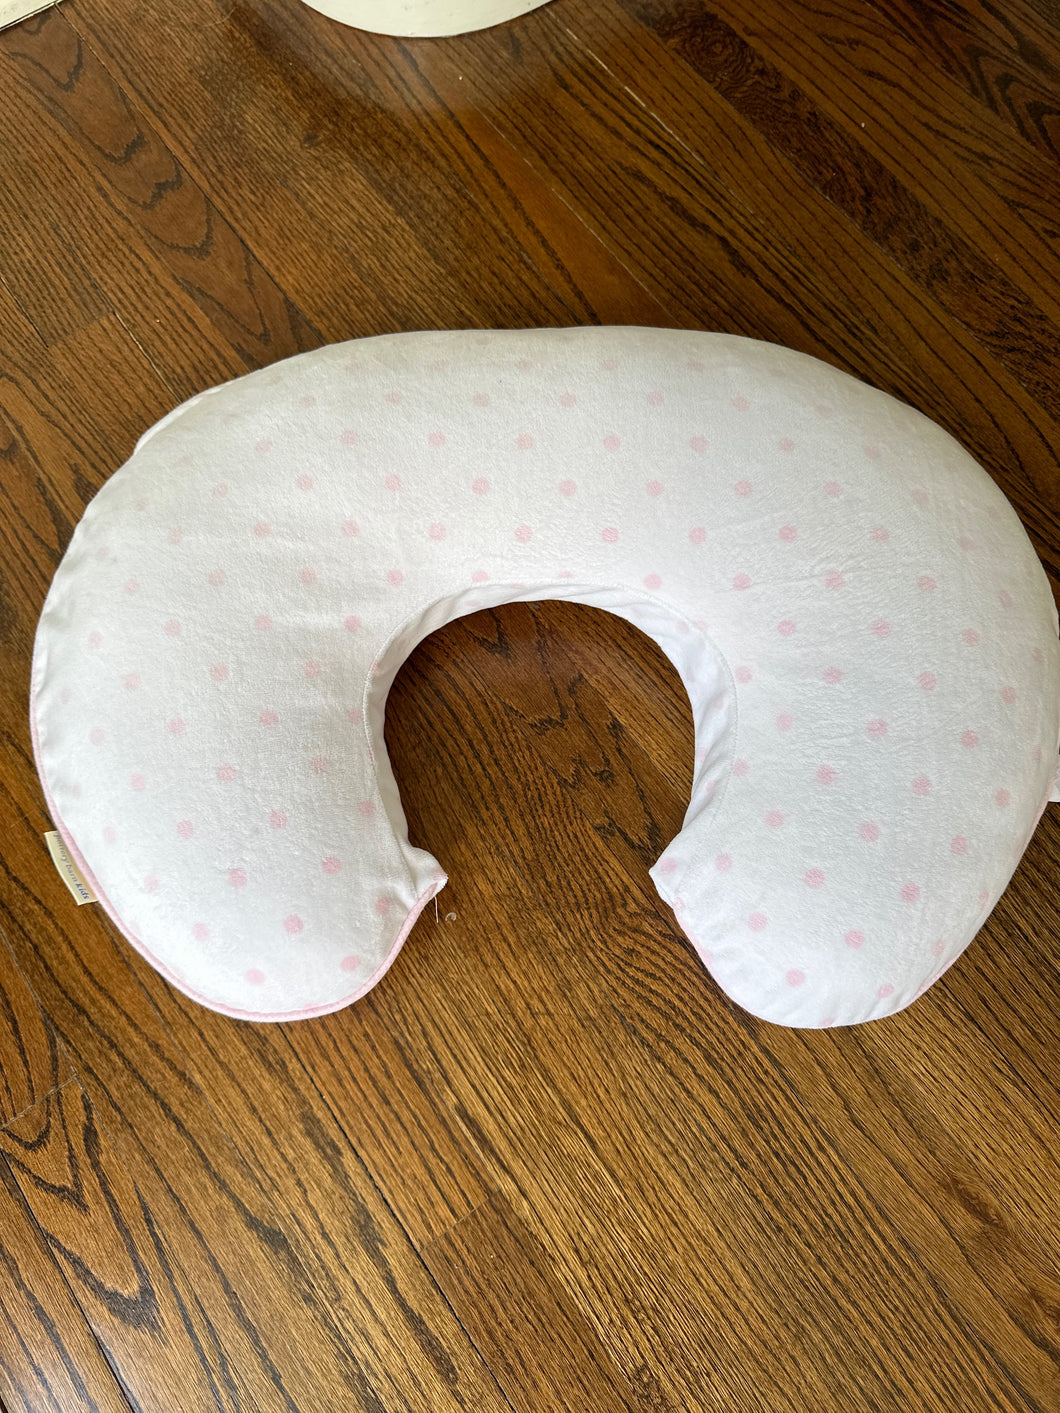 Boppy pink chamois pillow insert and cover